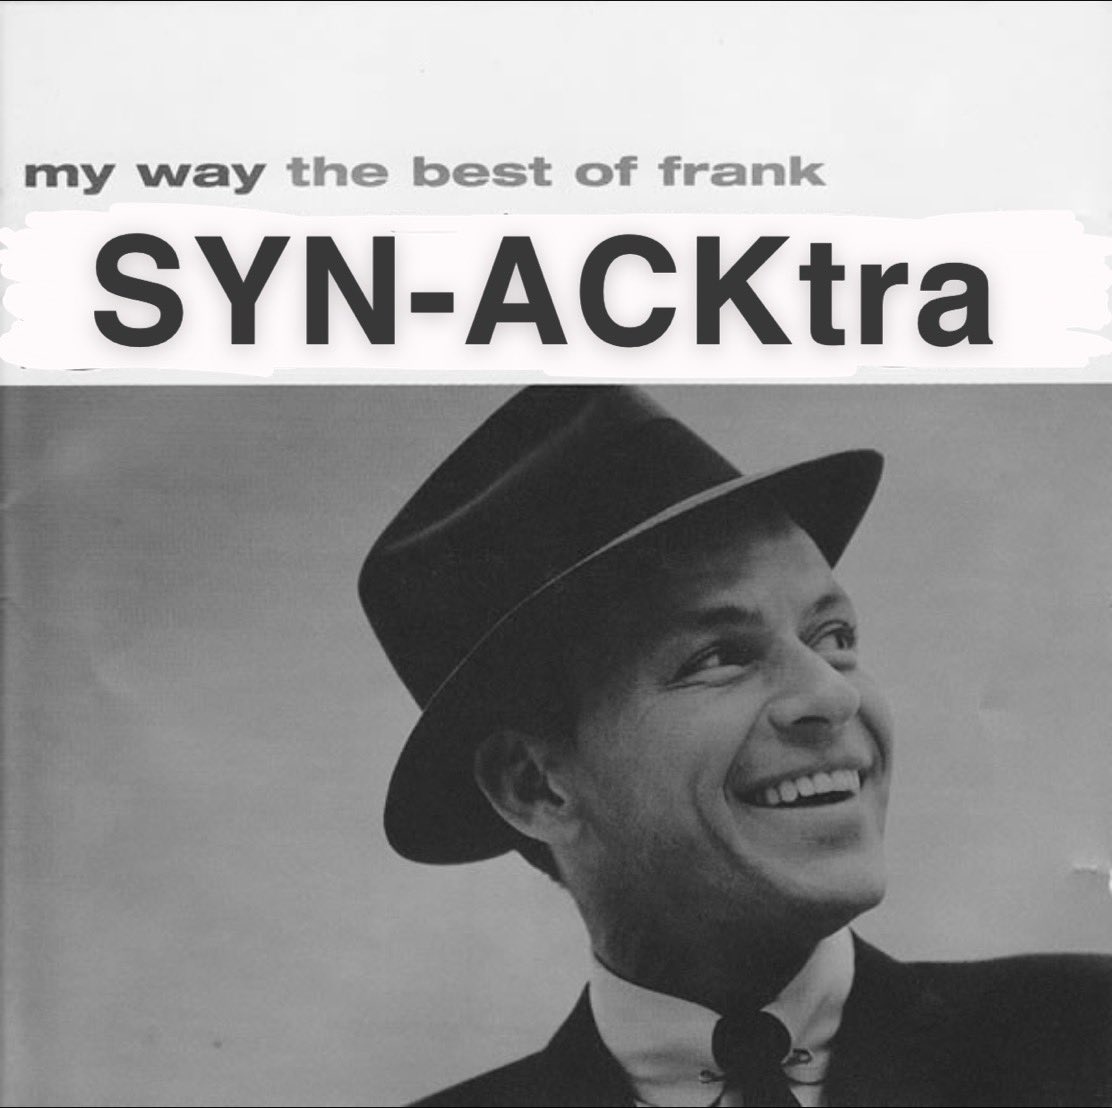 Frank Syn-acktra -- humour value only